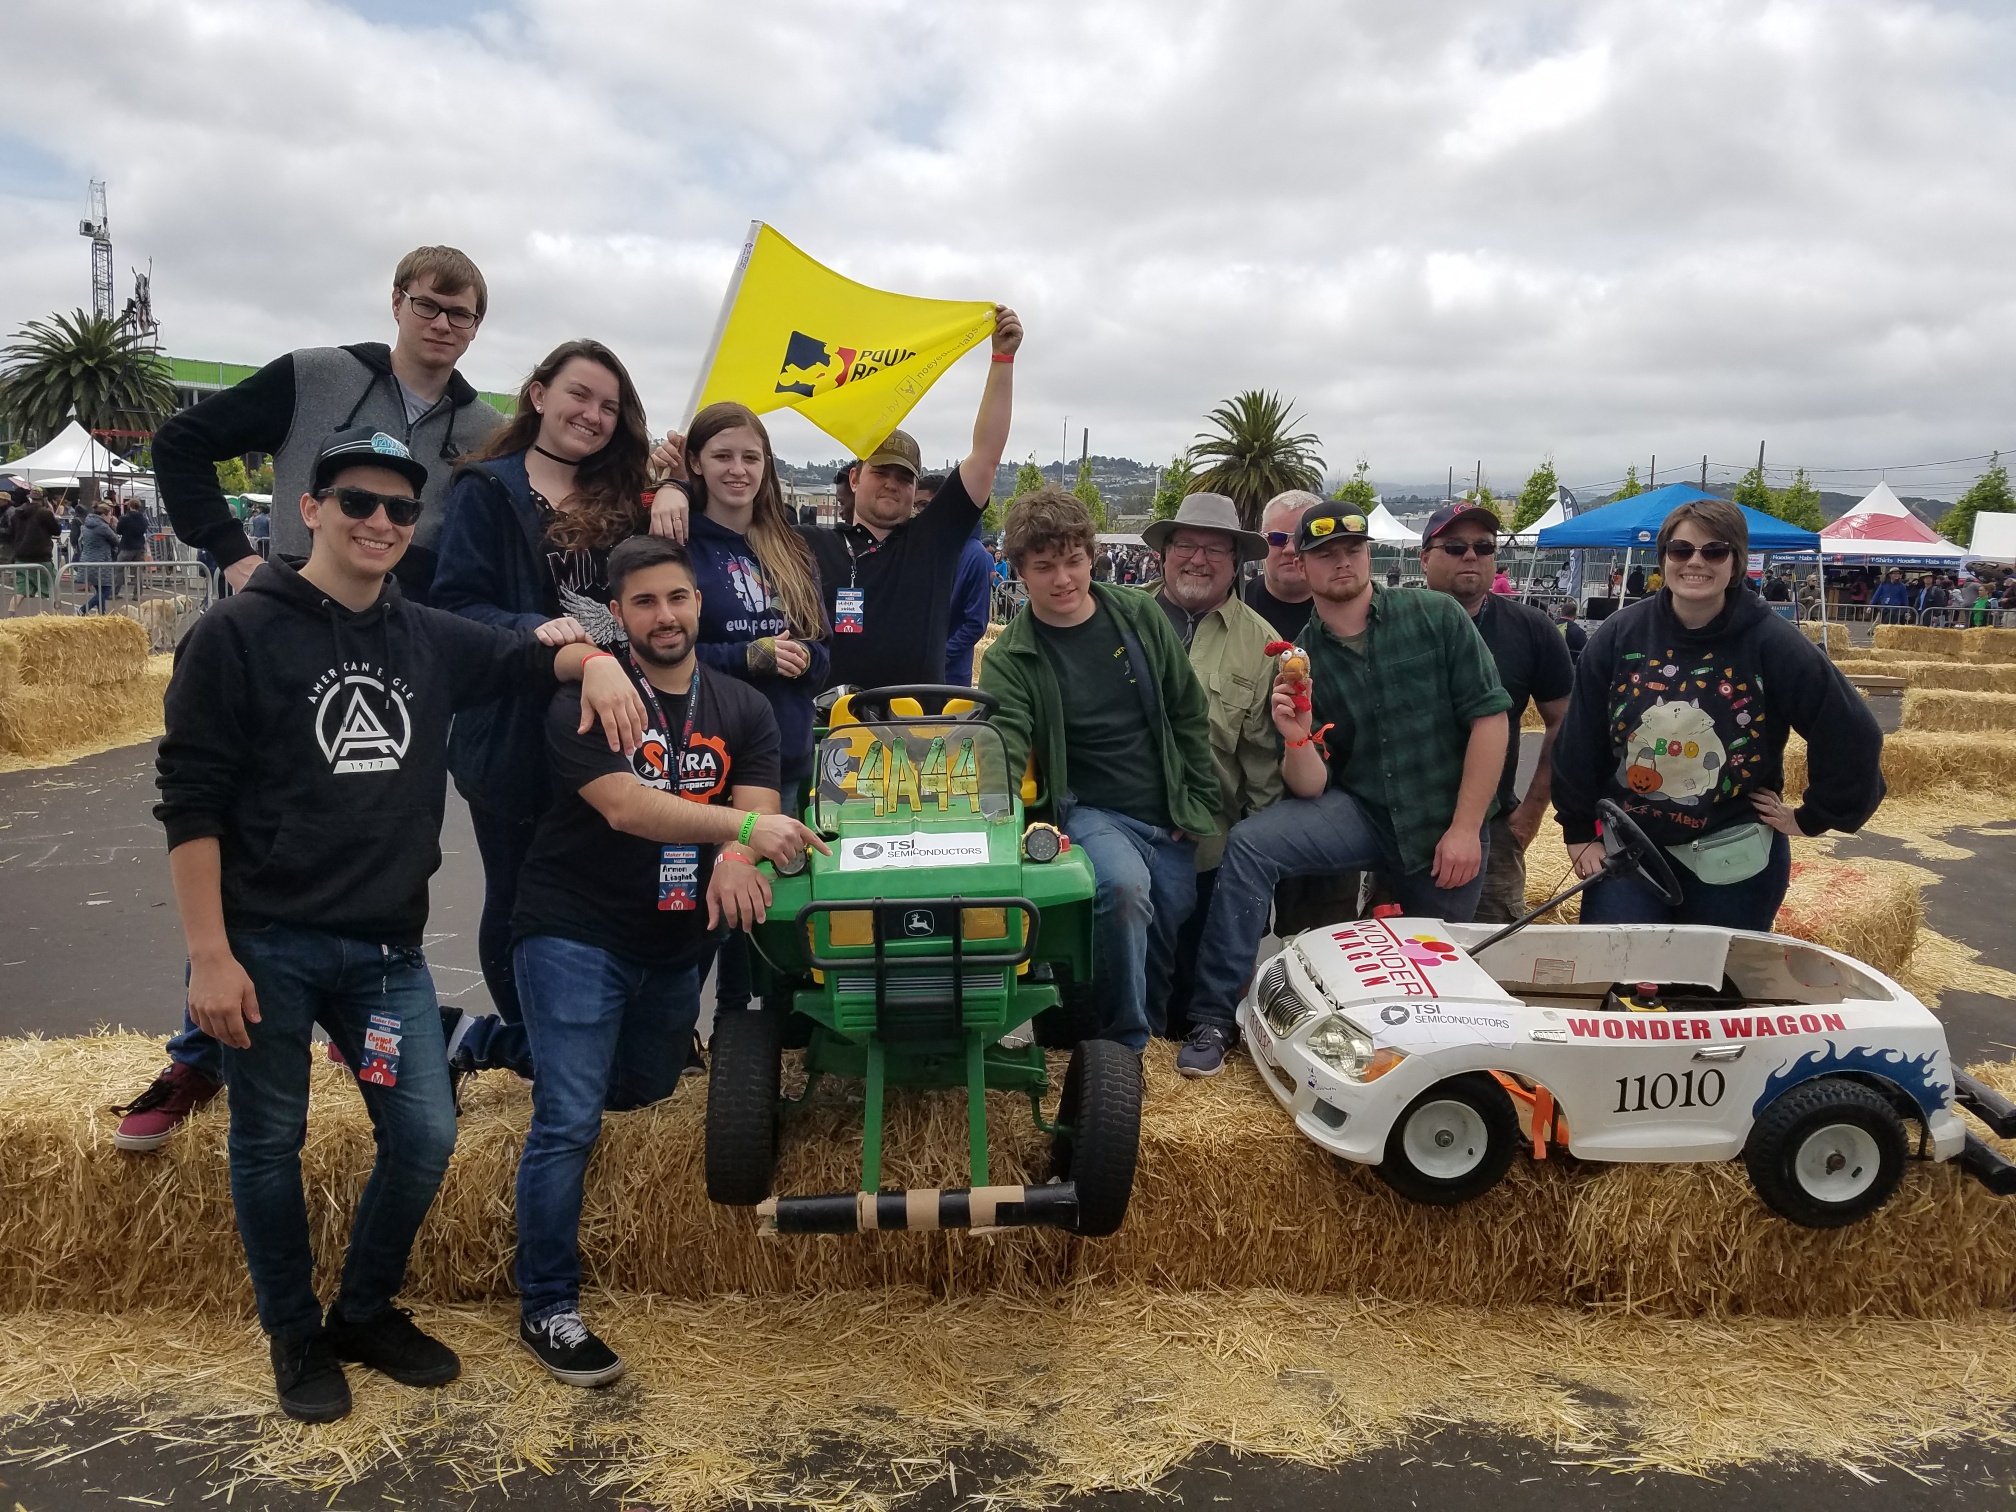 The Sierra College Robotic team participated in the Power Racing Series at Maker Fair in San Mateo in May.